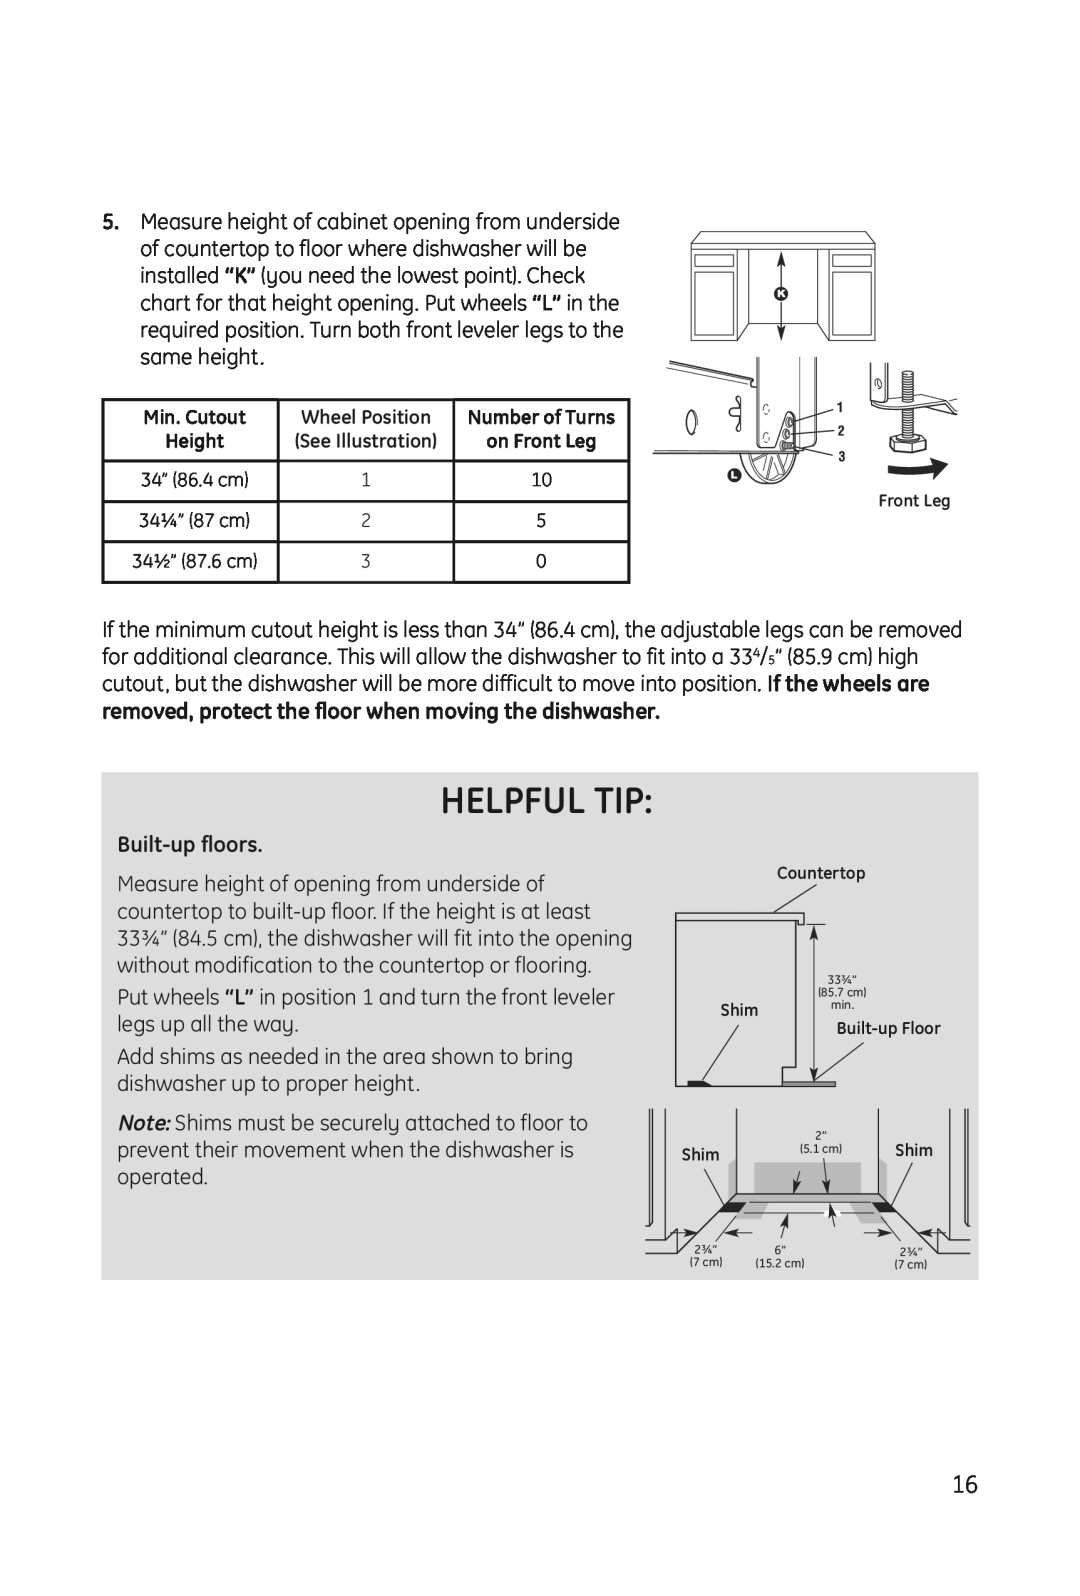 Haier DWL3025 installation manual removed, protect the floor when moving the dishwasher, Built-up floors, Helpful Tip 